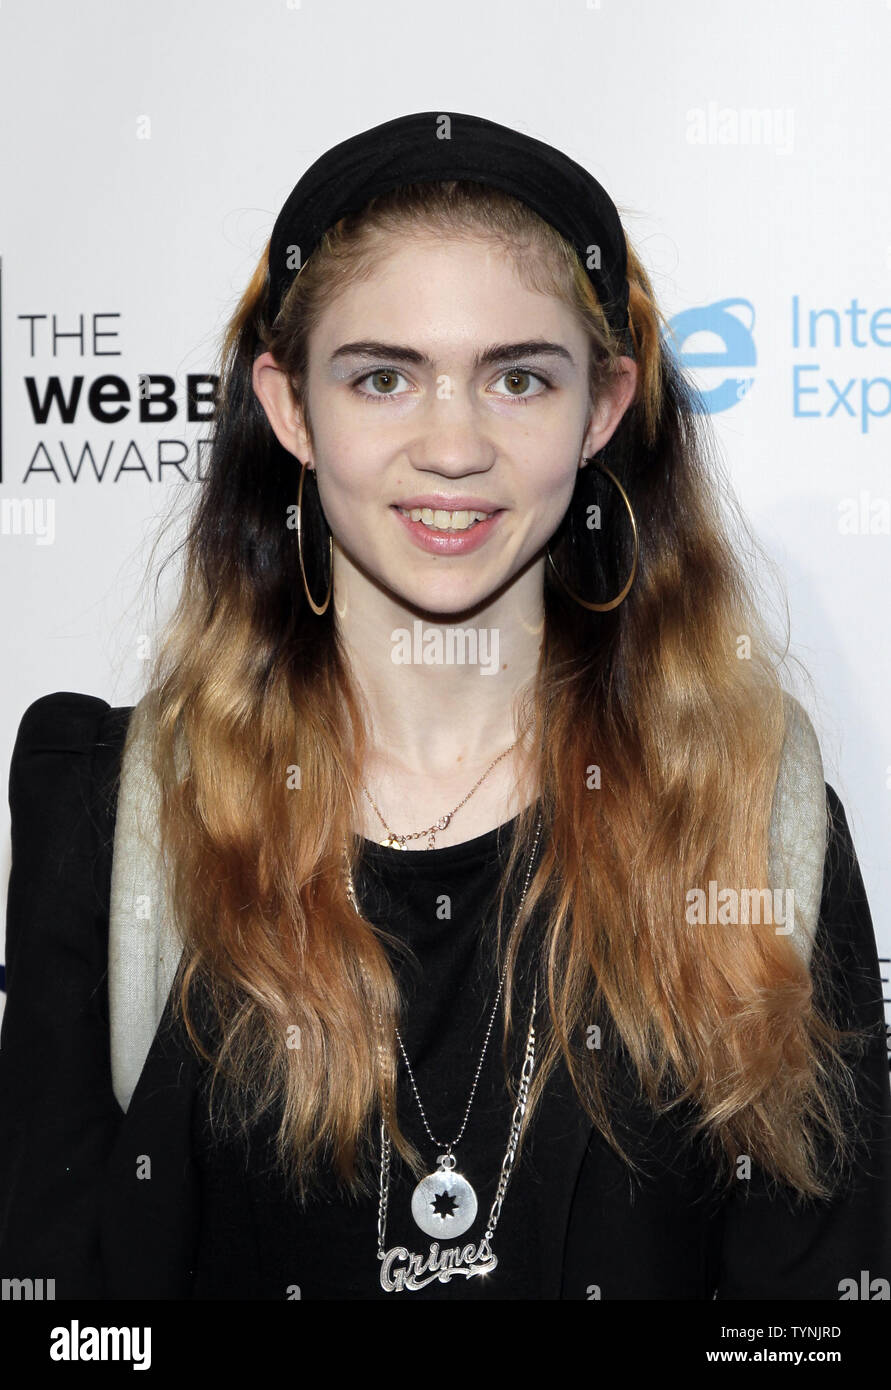 Grimes arrives on the red carpet the 17th Annual Webby Awards at Cipriani on Wall Street in New York City on 21, 2013. UPI/John Angelillo Photo - Alamy